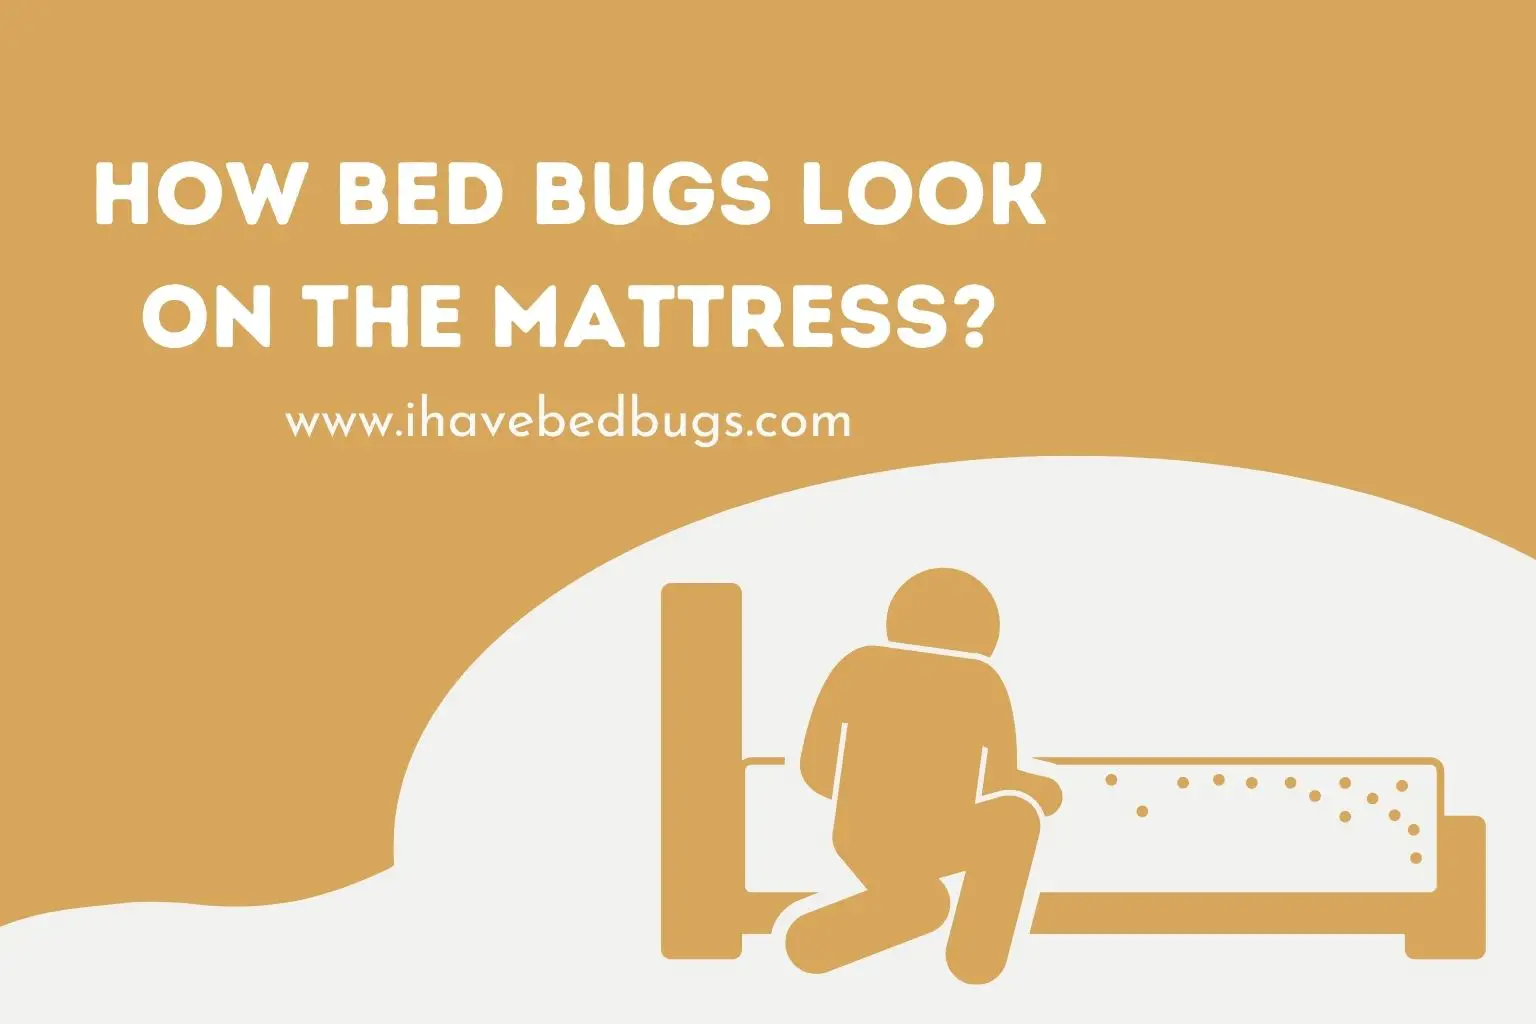 How bed bugs look on the mattress